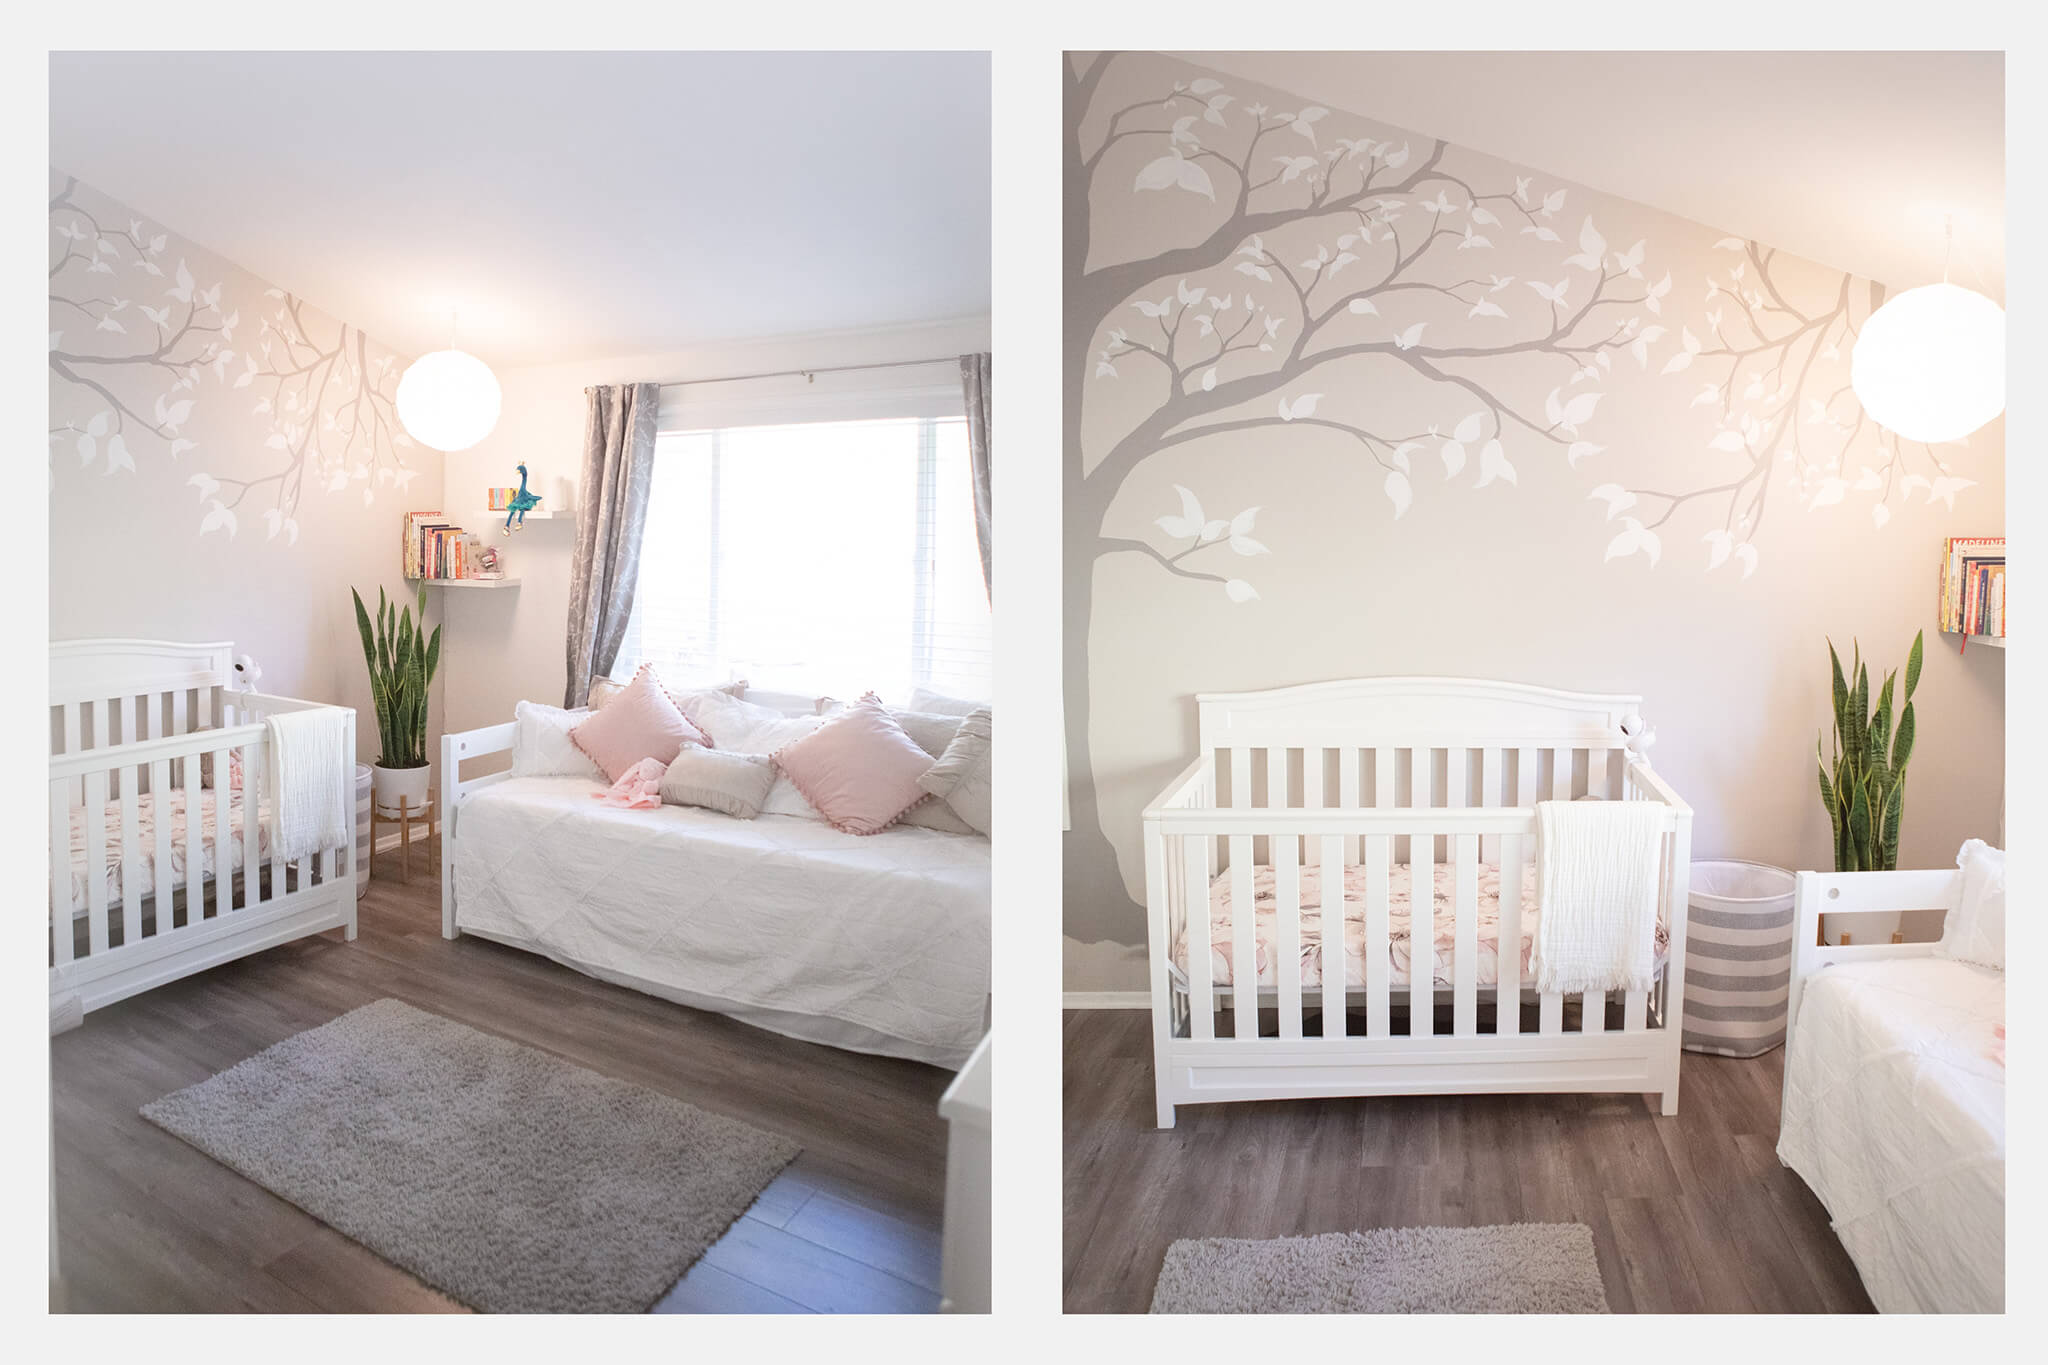 Images of nursery newly decorated in white, grey and pink for girl - Baby Furniture Los Angeles